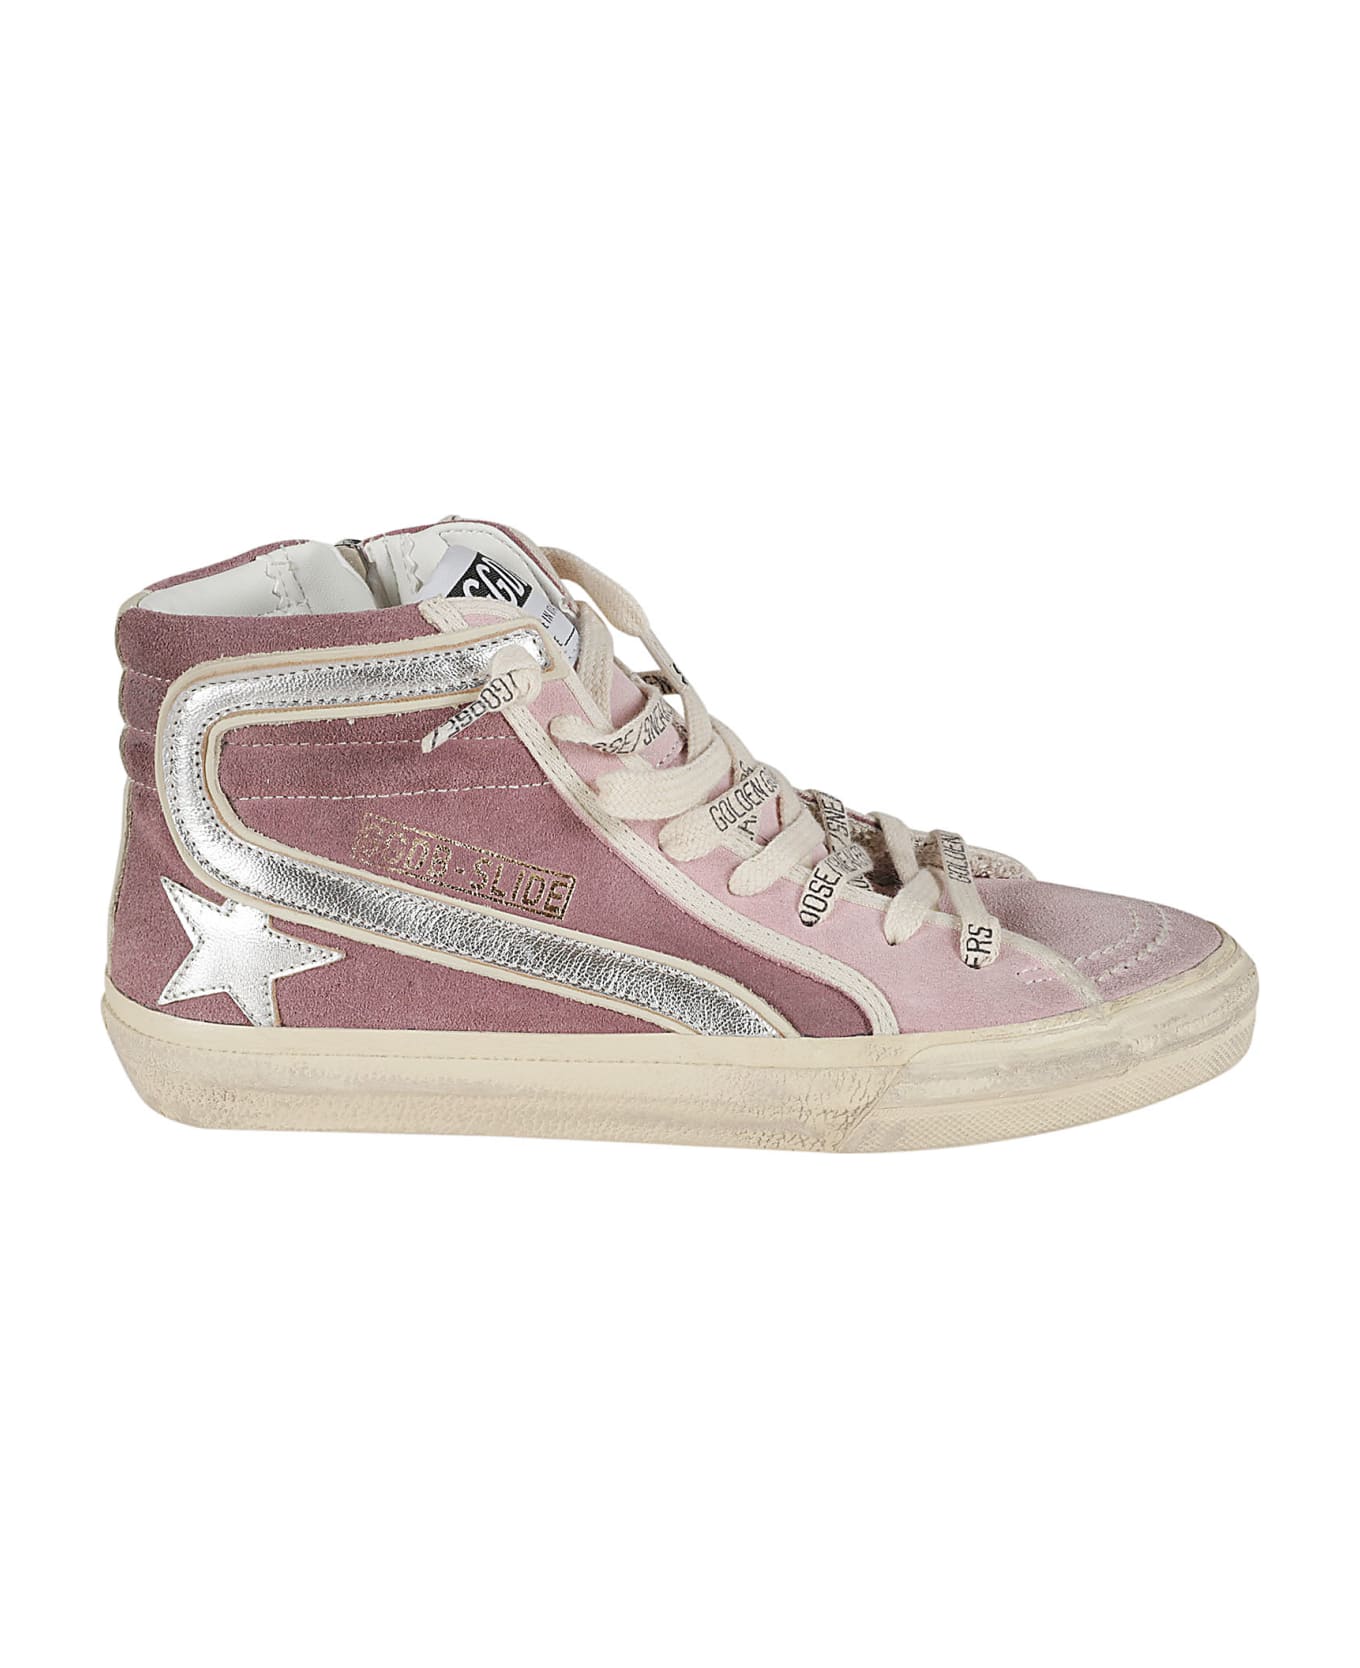 Golden Goose Slide Classic Sneakers - Purple/Silver/Ivory スニーカー